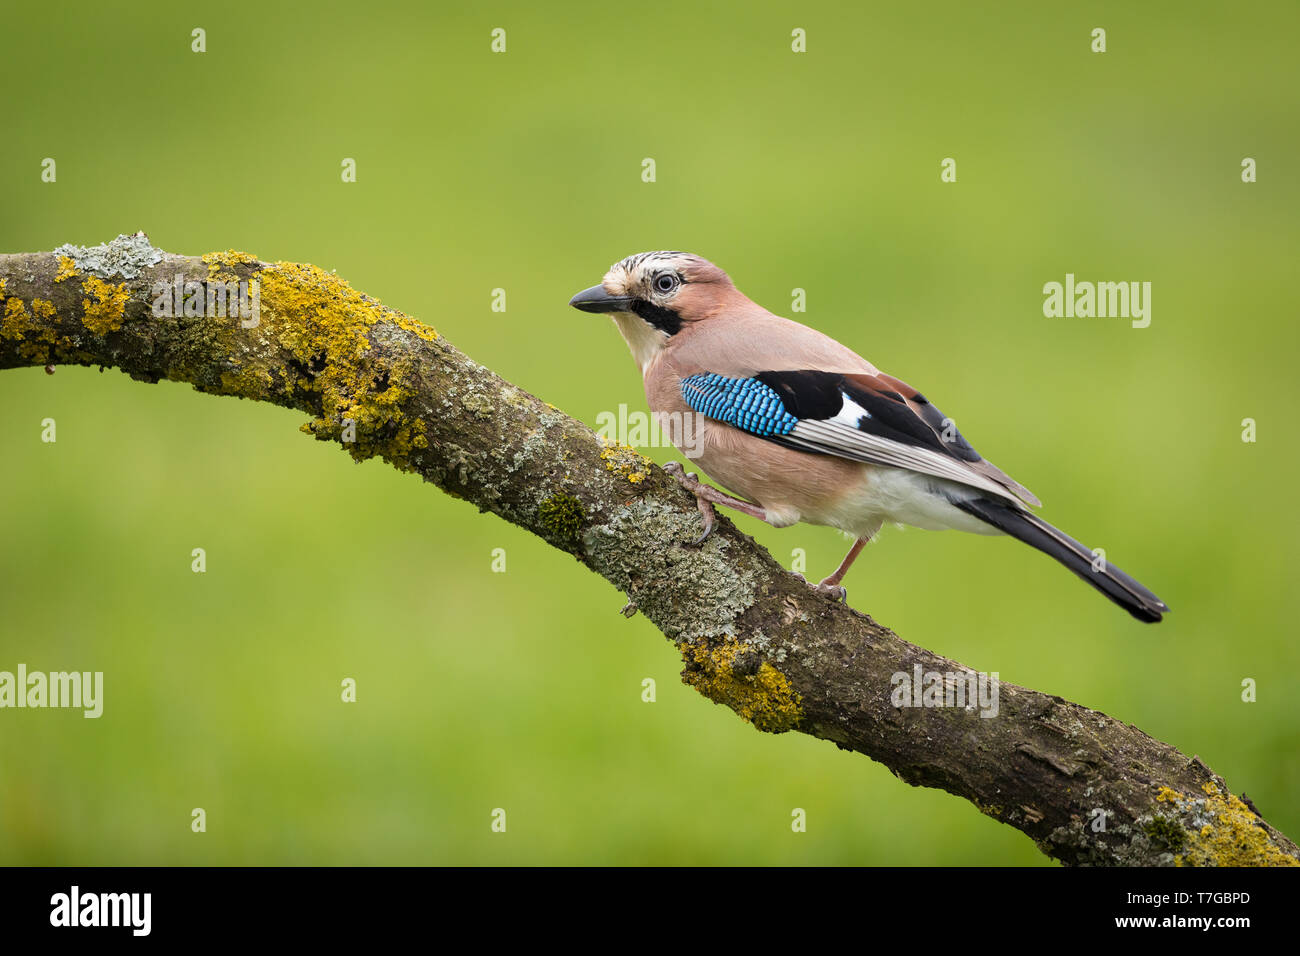 Jay perched on a branch Stock Photo